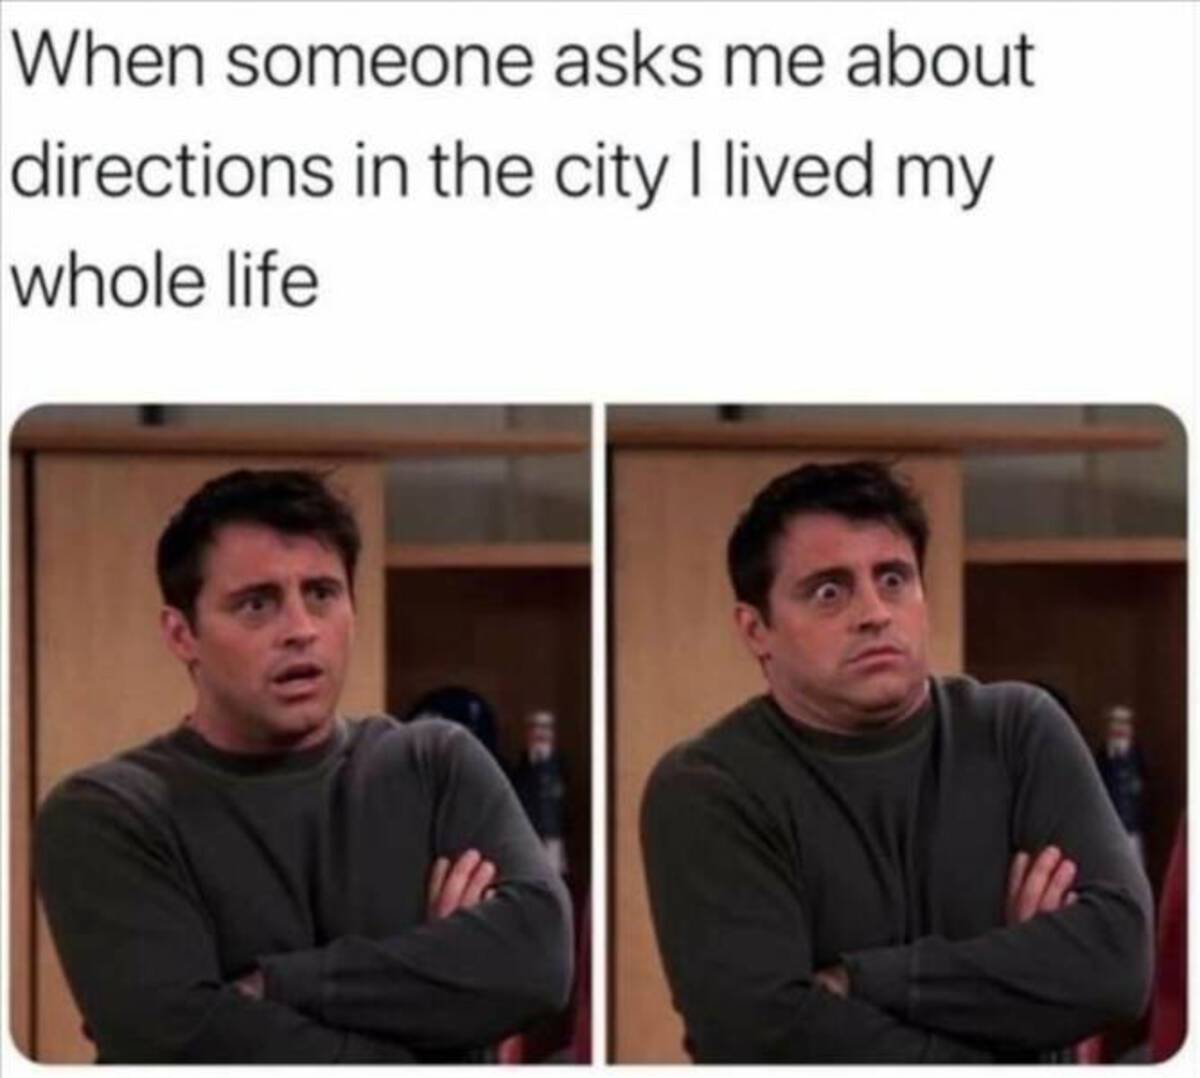 someone asking directions in the city i ve lived my whole life - When someone asks me about directions in the city I lived my whole life